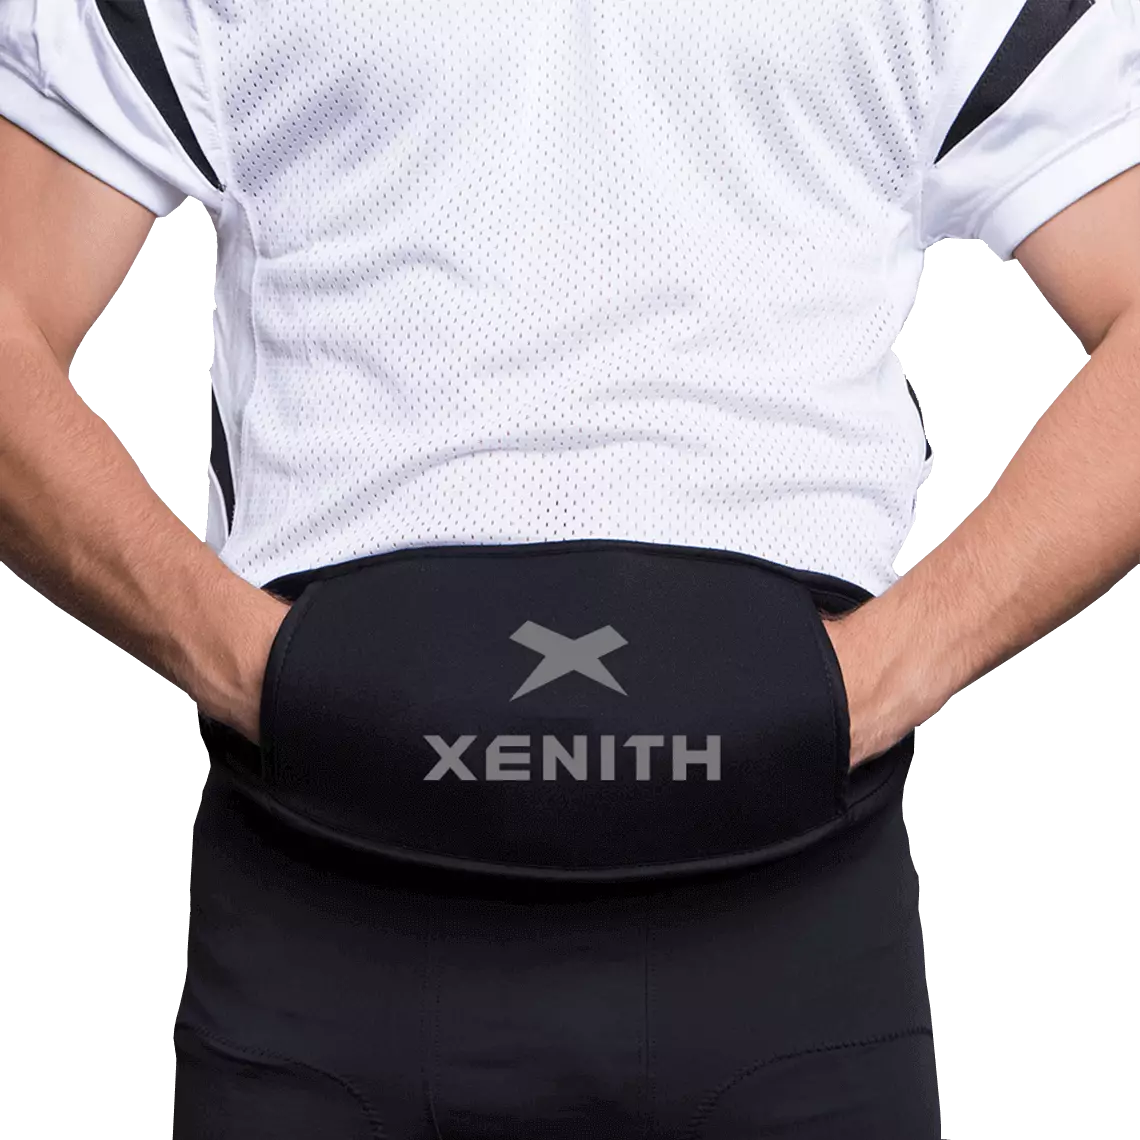 Front facing view of player wearing black Xenith hand warmer with white logo.